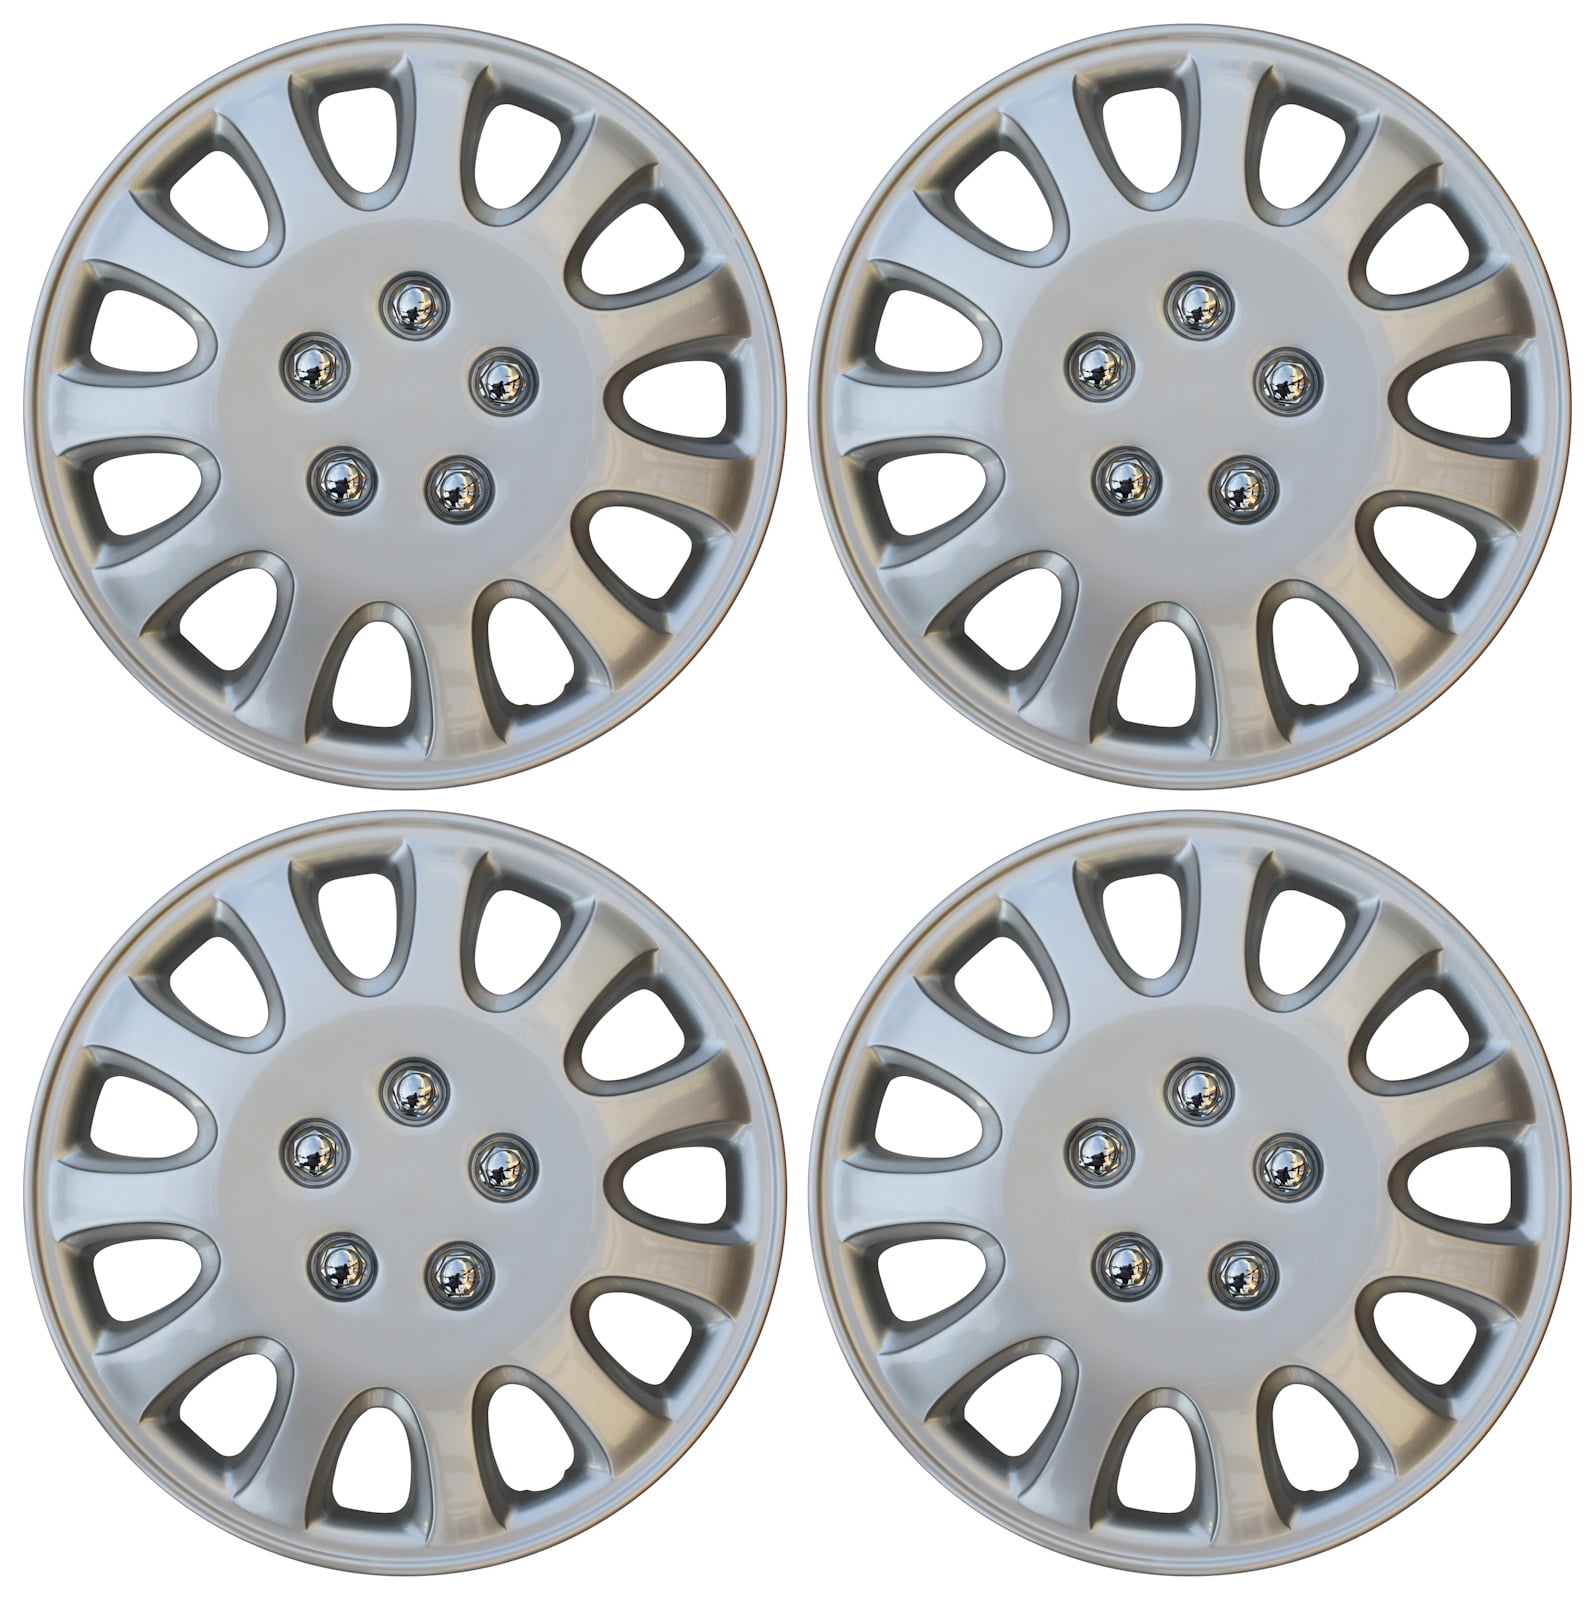 4 Piece Set 14" Inch Hub Cap Silver Skin Rim Cover for Steel Wheel Covers Caps 